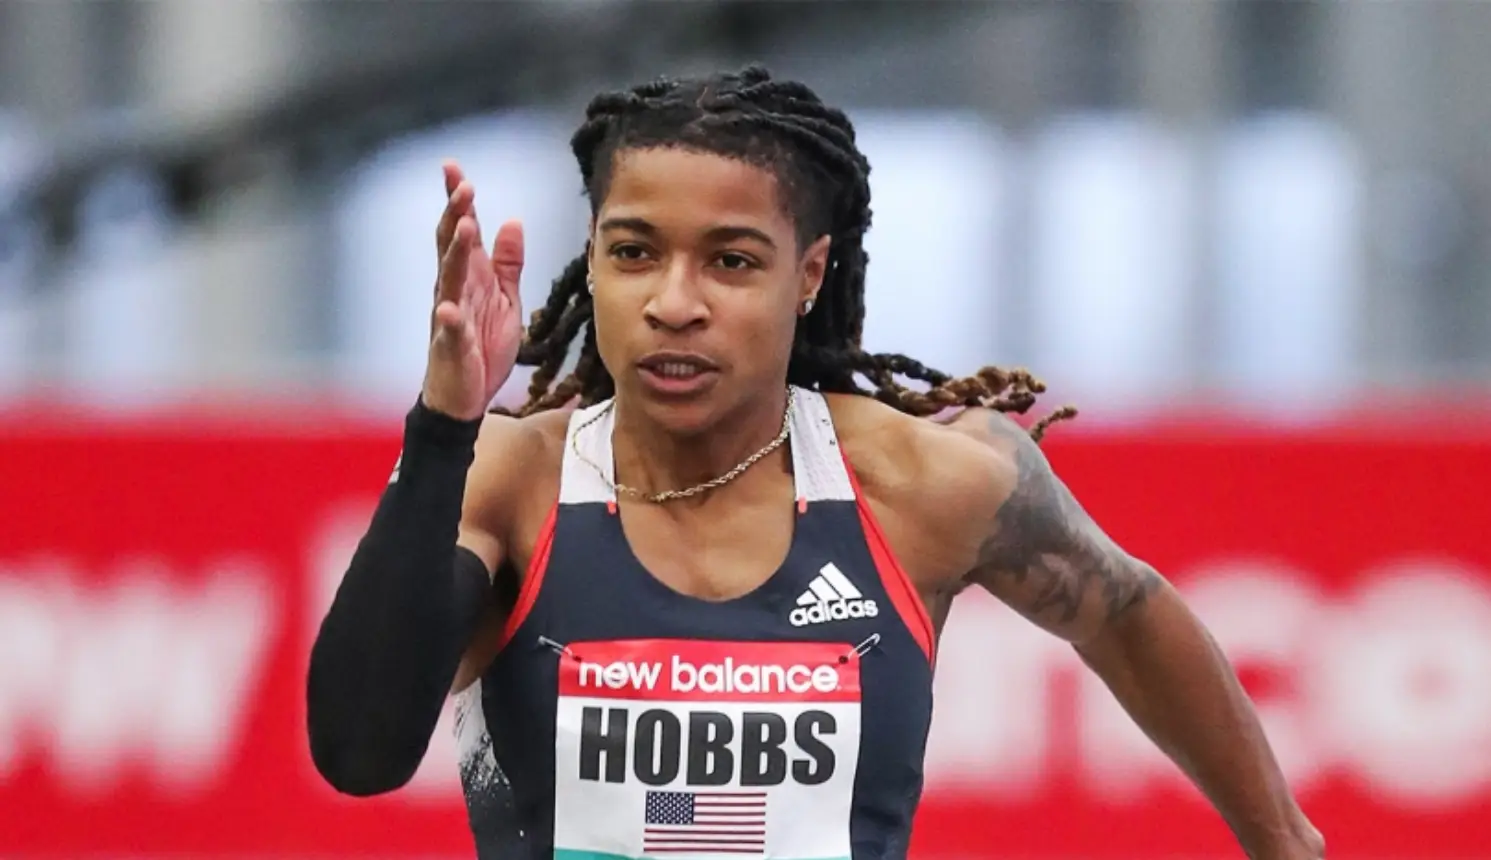 Aleia Hobbs stormed to 60m success at the US Indoor Championships 2023